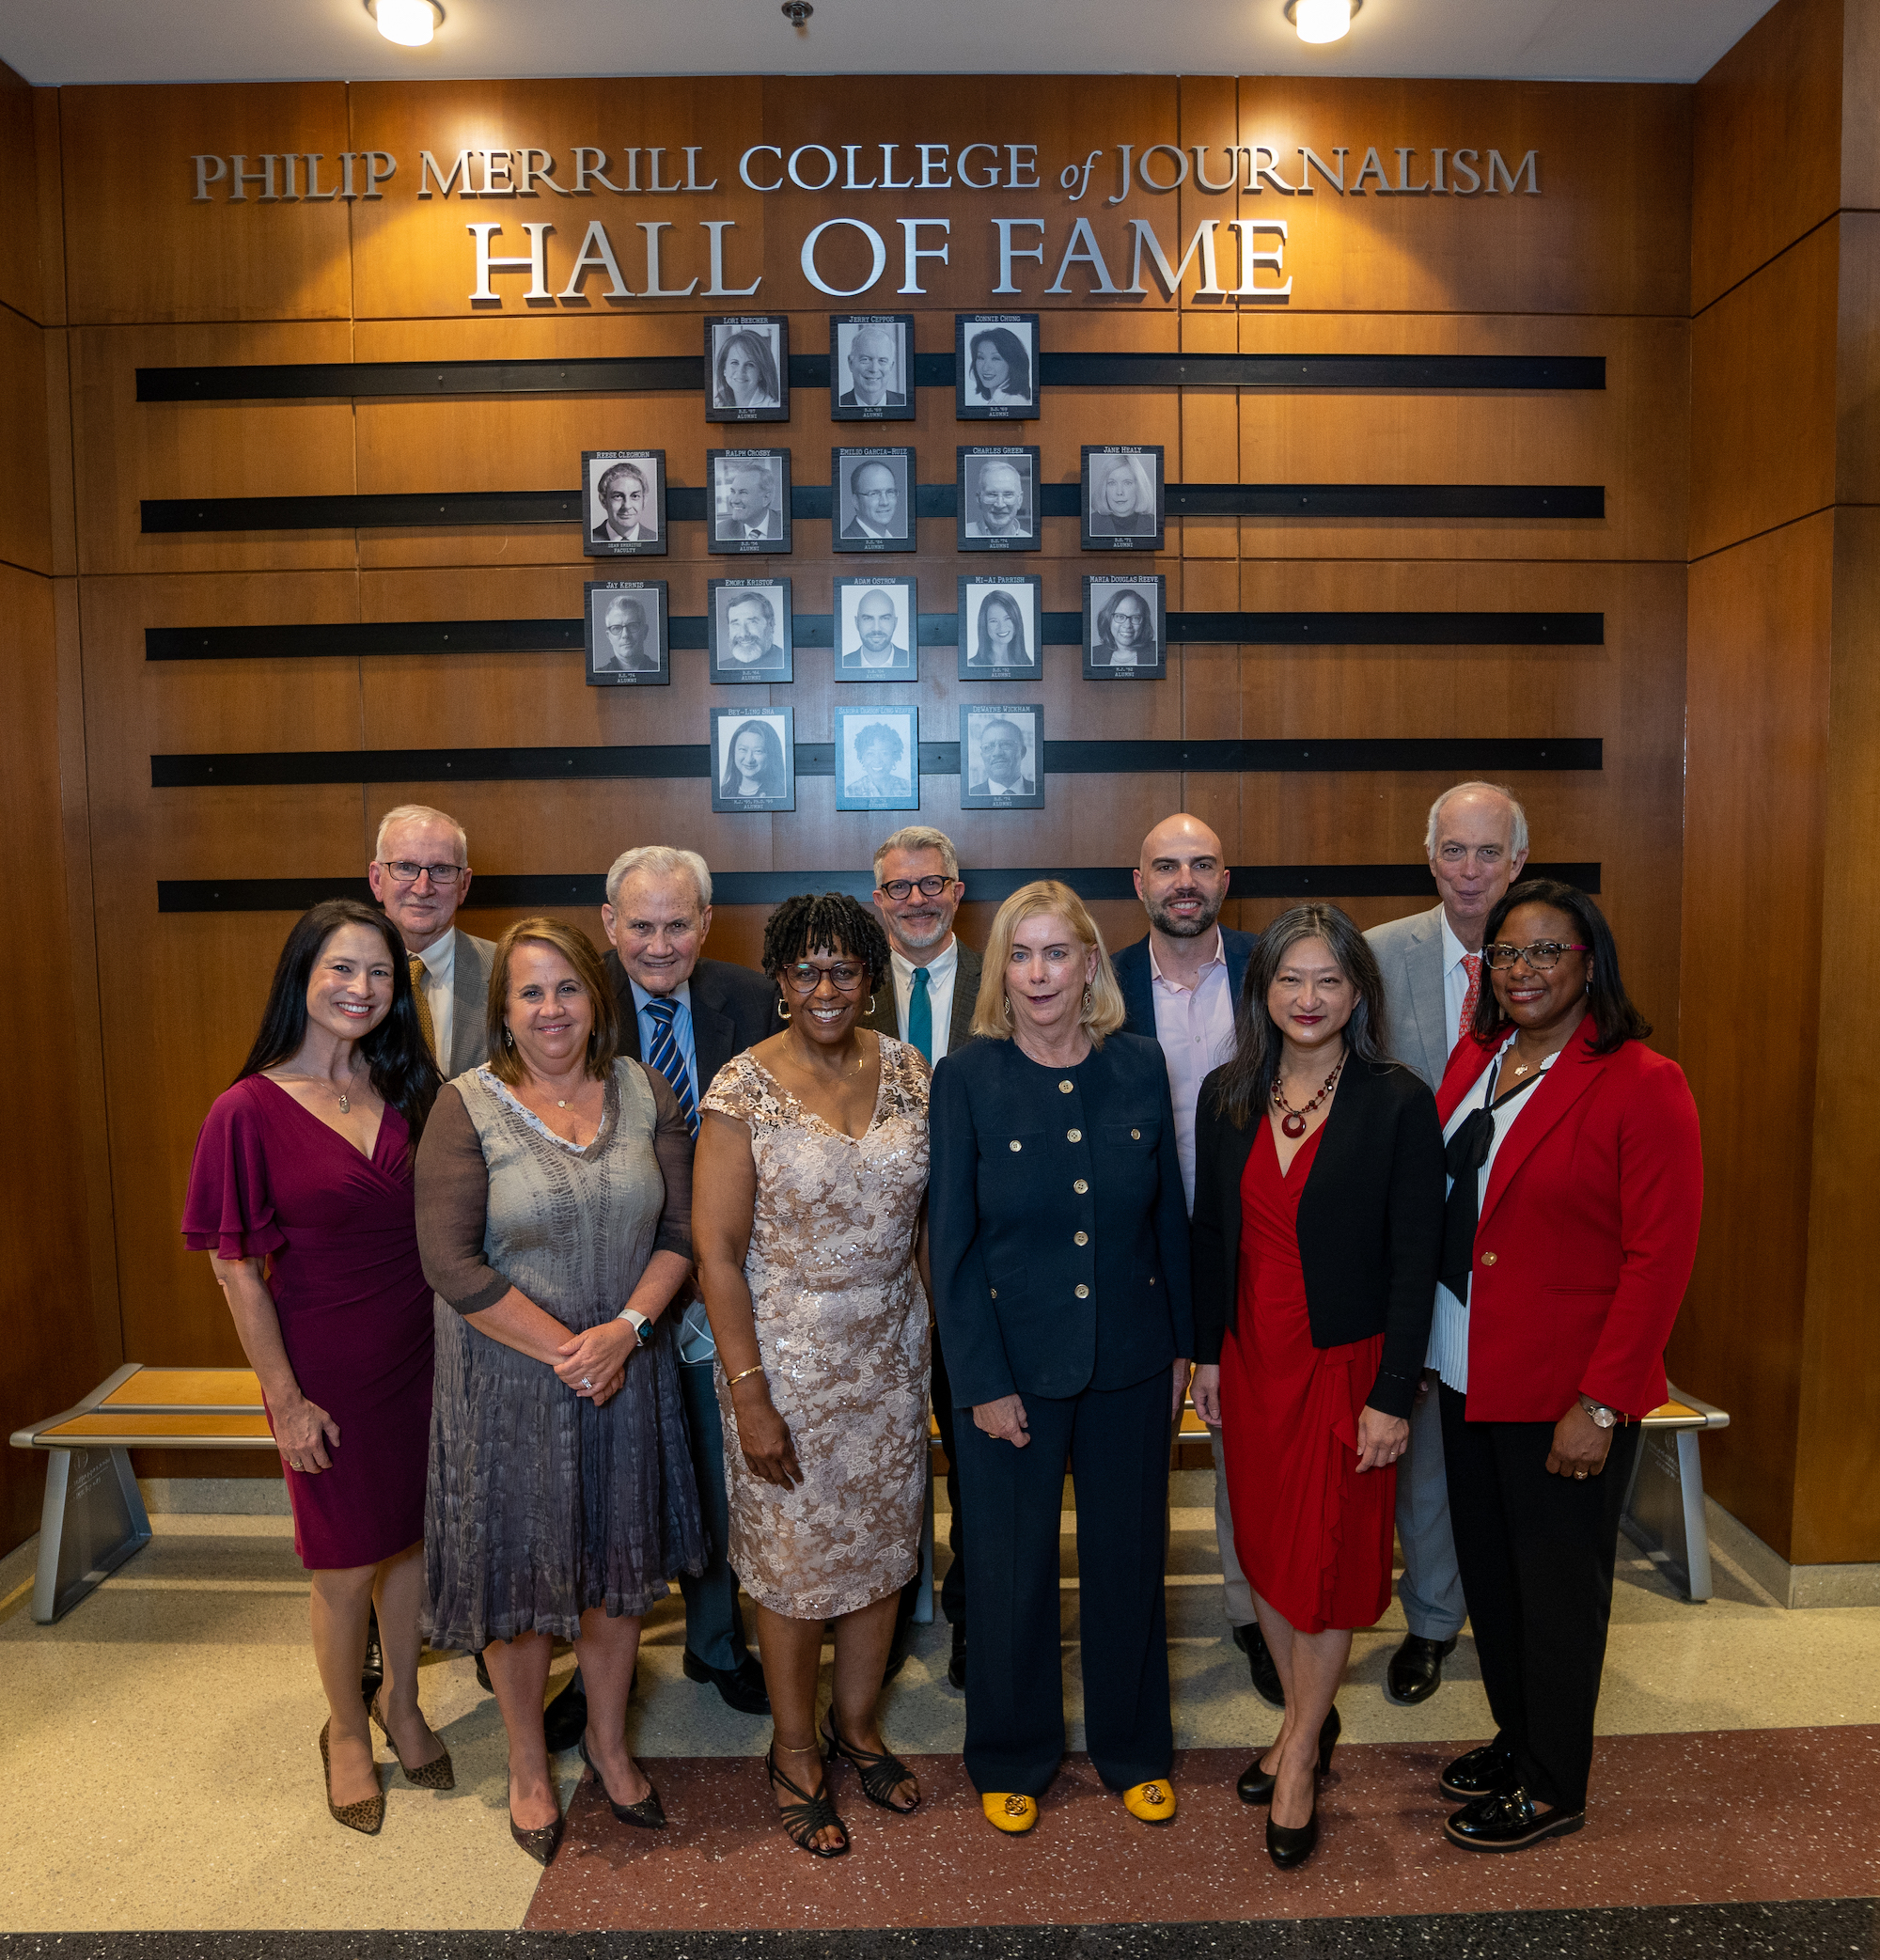 Merrill College Hall of Fame inaugural class